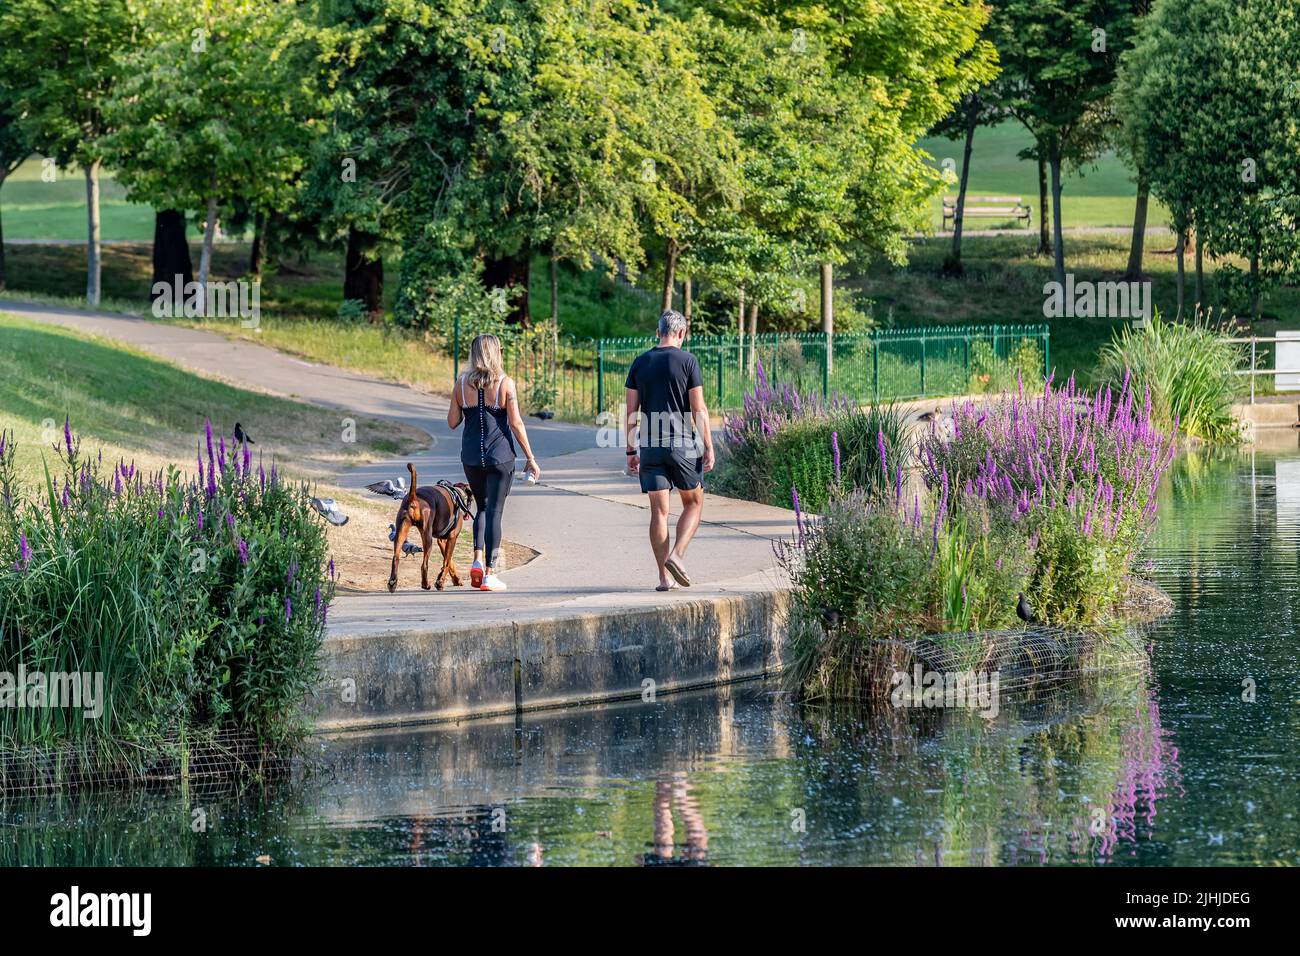 Northampton 19th July 2022. Forecast to be the hottest day on record, so people are out early walking their dogs in Abington Park while it's a little cooler before the heat of the day gets intense.  Credit: Keith J Smith./Alamy Live News. Stock Photo